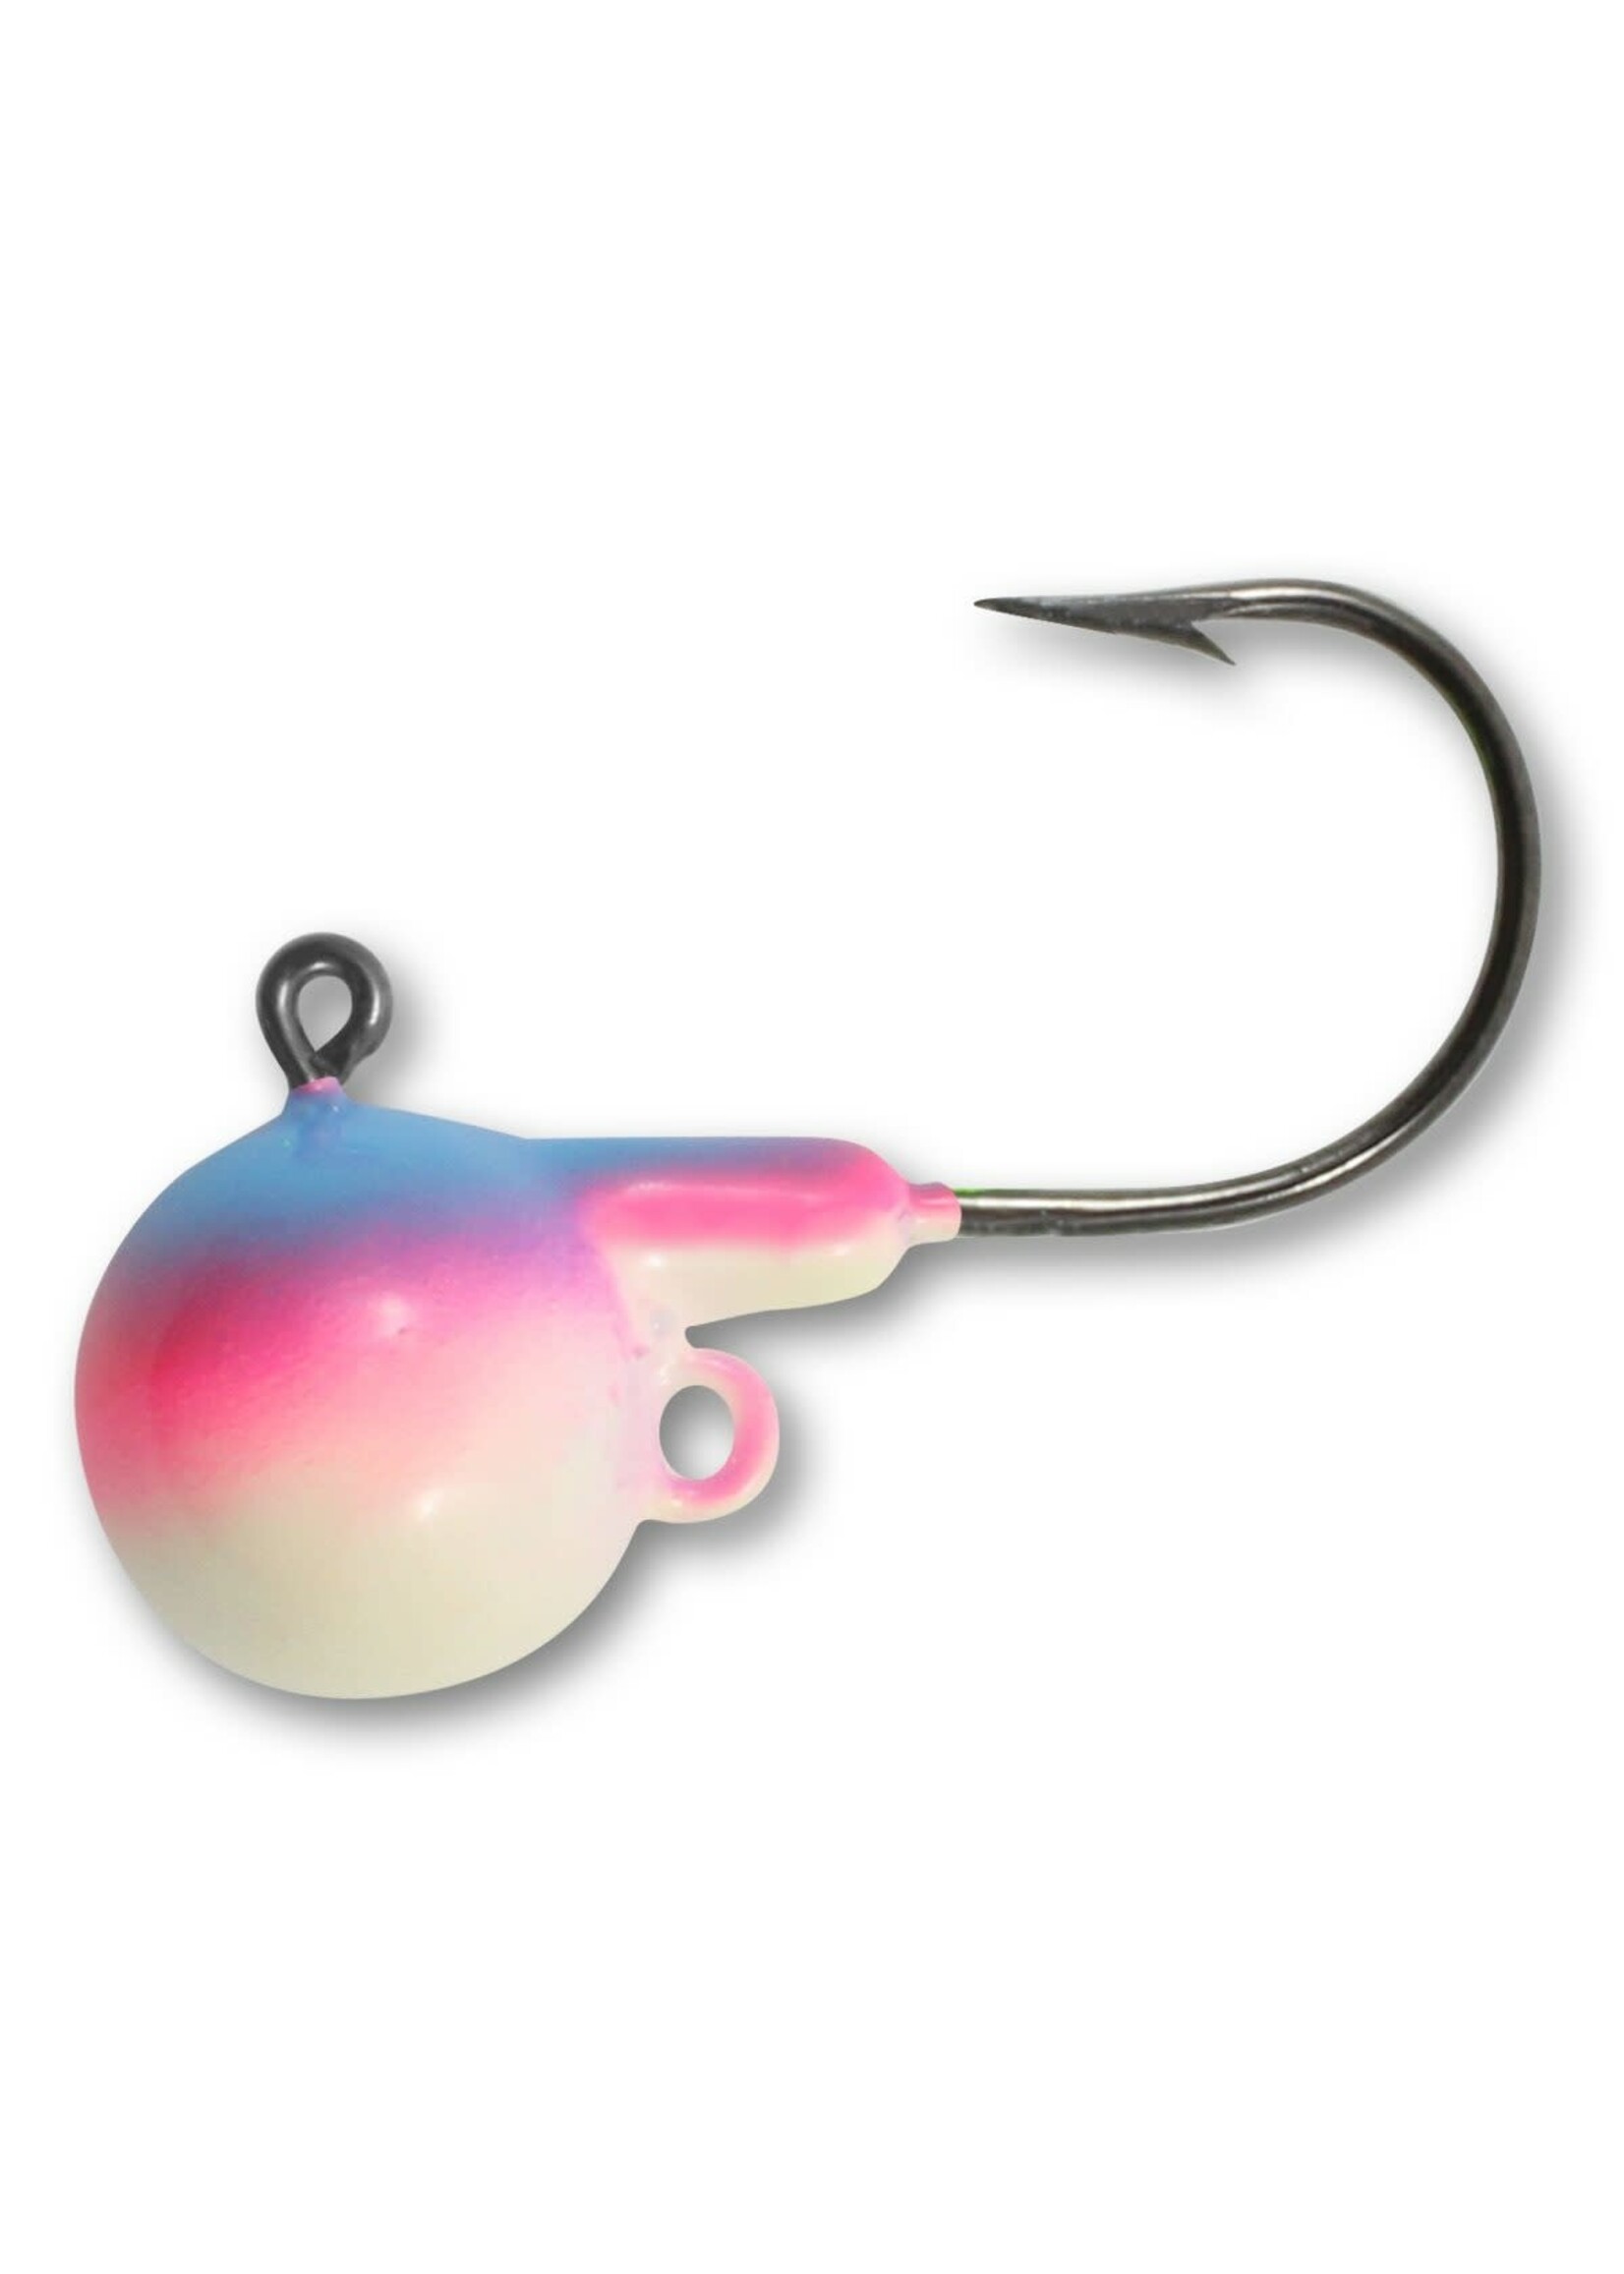 Northland Fishing Tackle Northland Tackle Tungsten Fire-Ball UV Jig